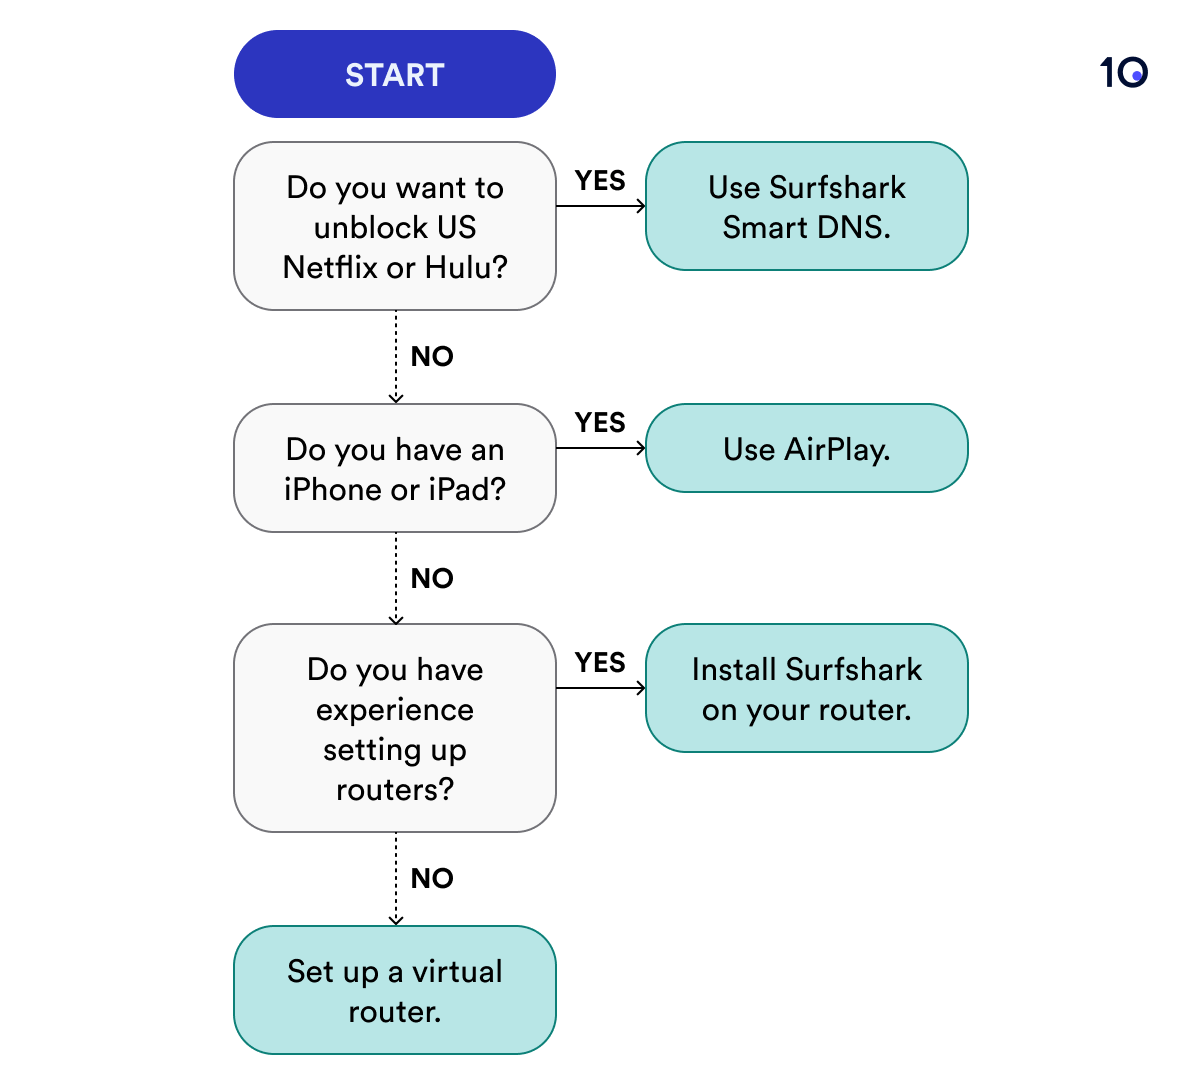 Flowchart for using Surfshark with Apple TV. f you want to unblock US Netflix or Hulu, it suggests using Surfshark Smart DNS. If you have an iPhone or iPad, it recommends using AirPlay. For those with experience setting up routers, it advises installing Surfshark on your router. If none apply, the final step is to set up a virtual router. The flowchart is color-coded with yes responses in green and no responses in grey